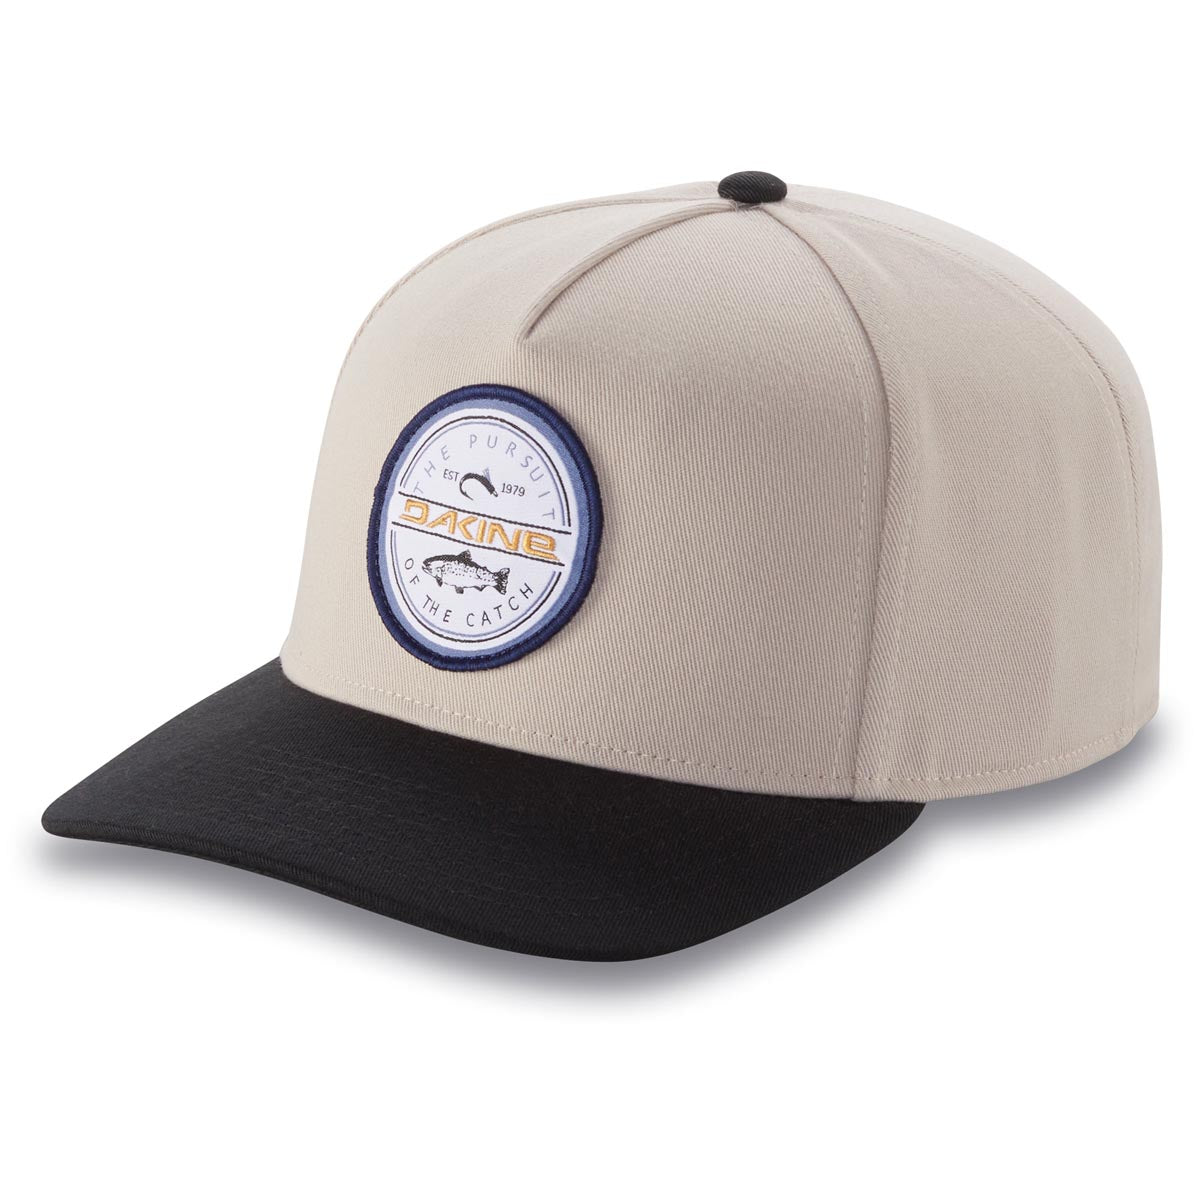 Dakine All Sports Patch Ball Hat - Silver Lining image 1